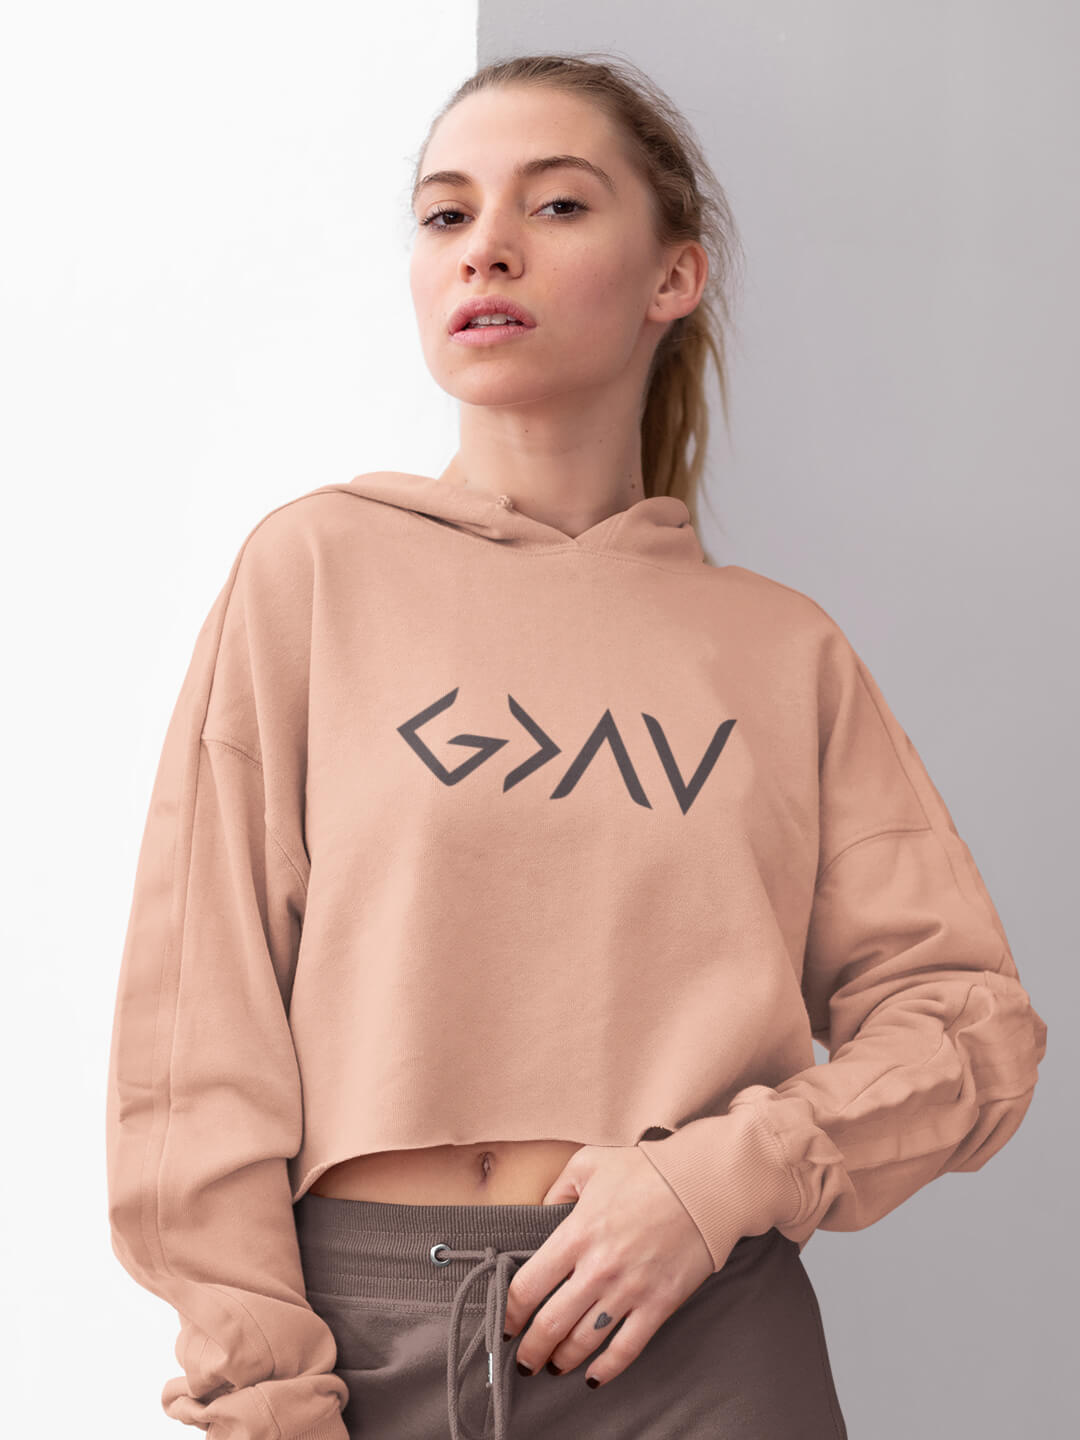 God Greater Than Highs And Lows - Women's Crop Hoodie-Made In Agapé